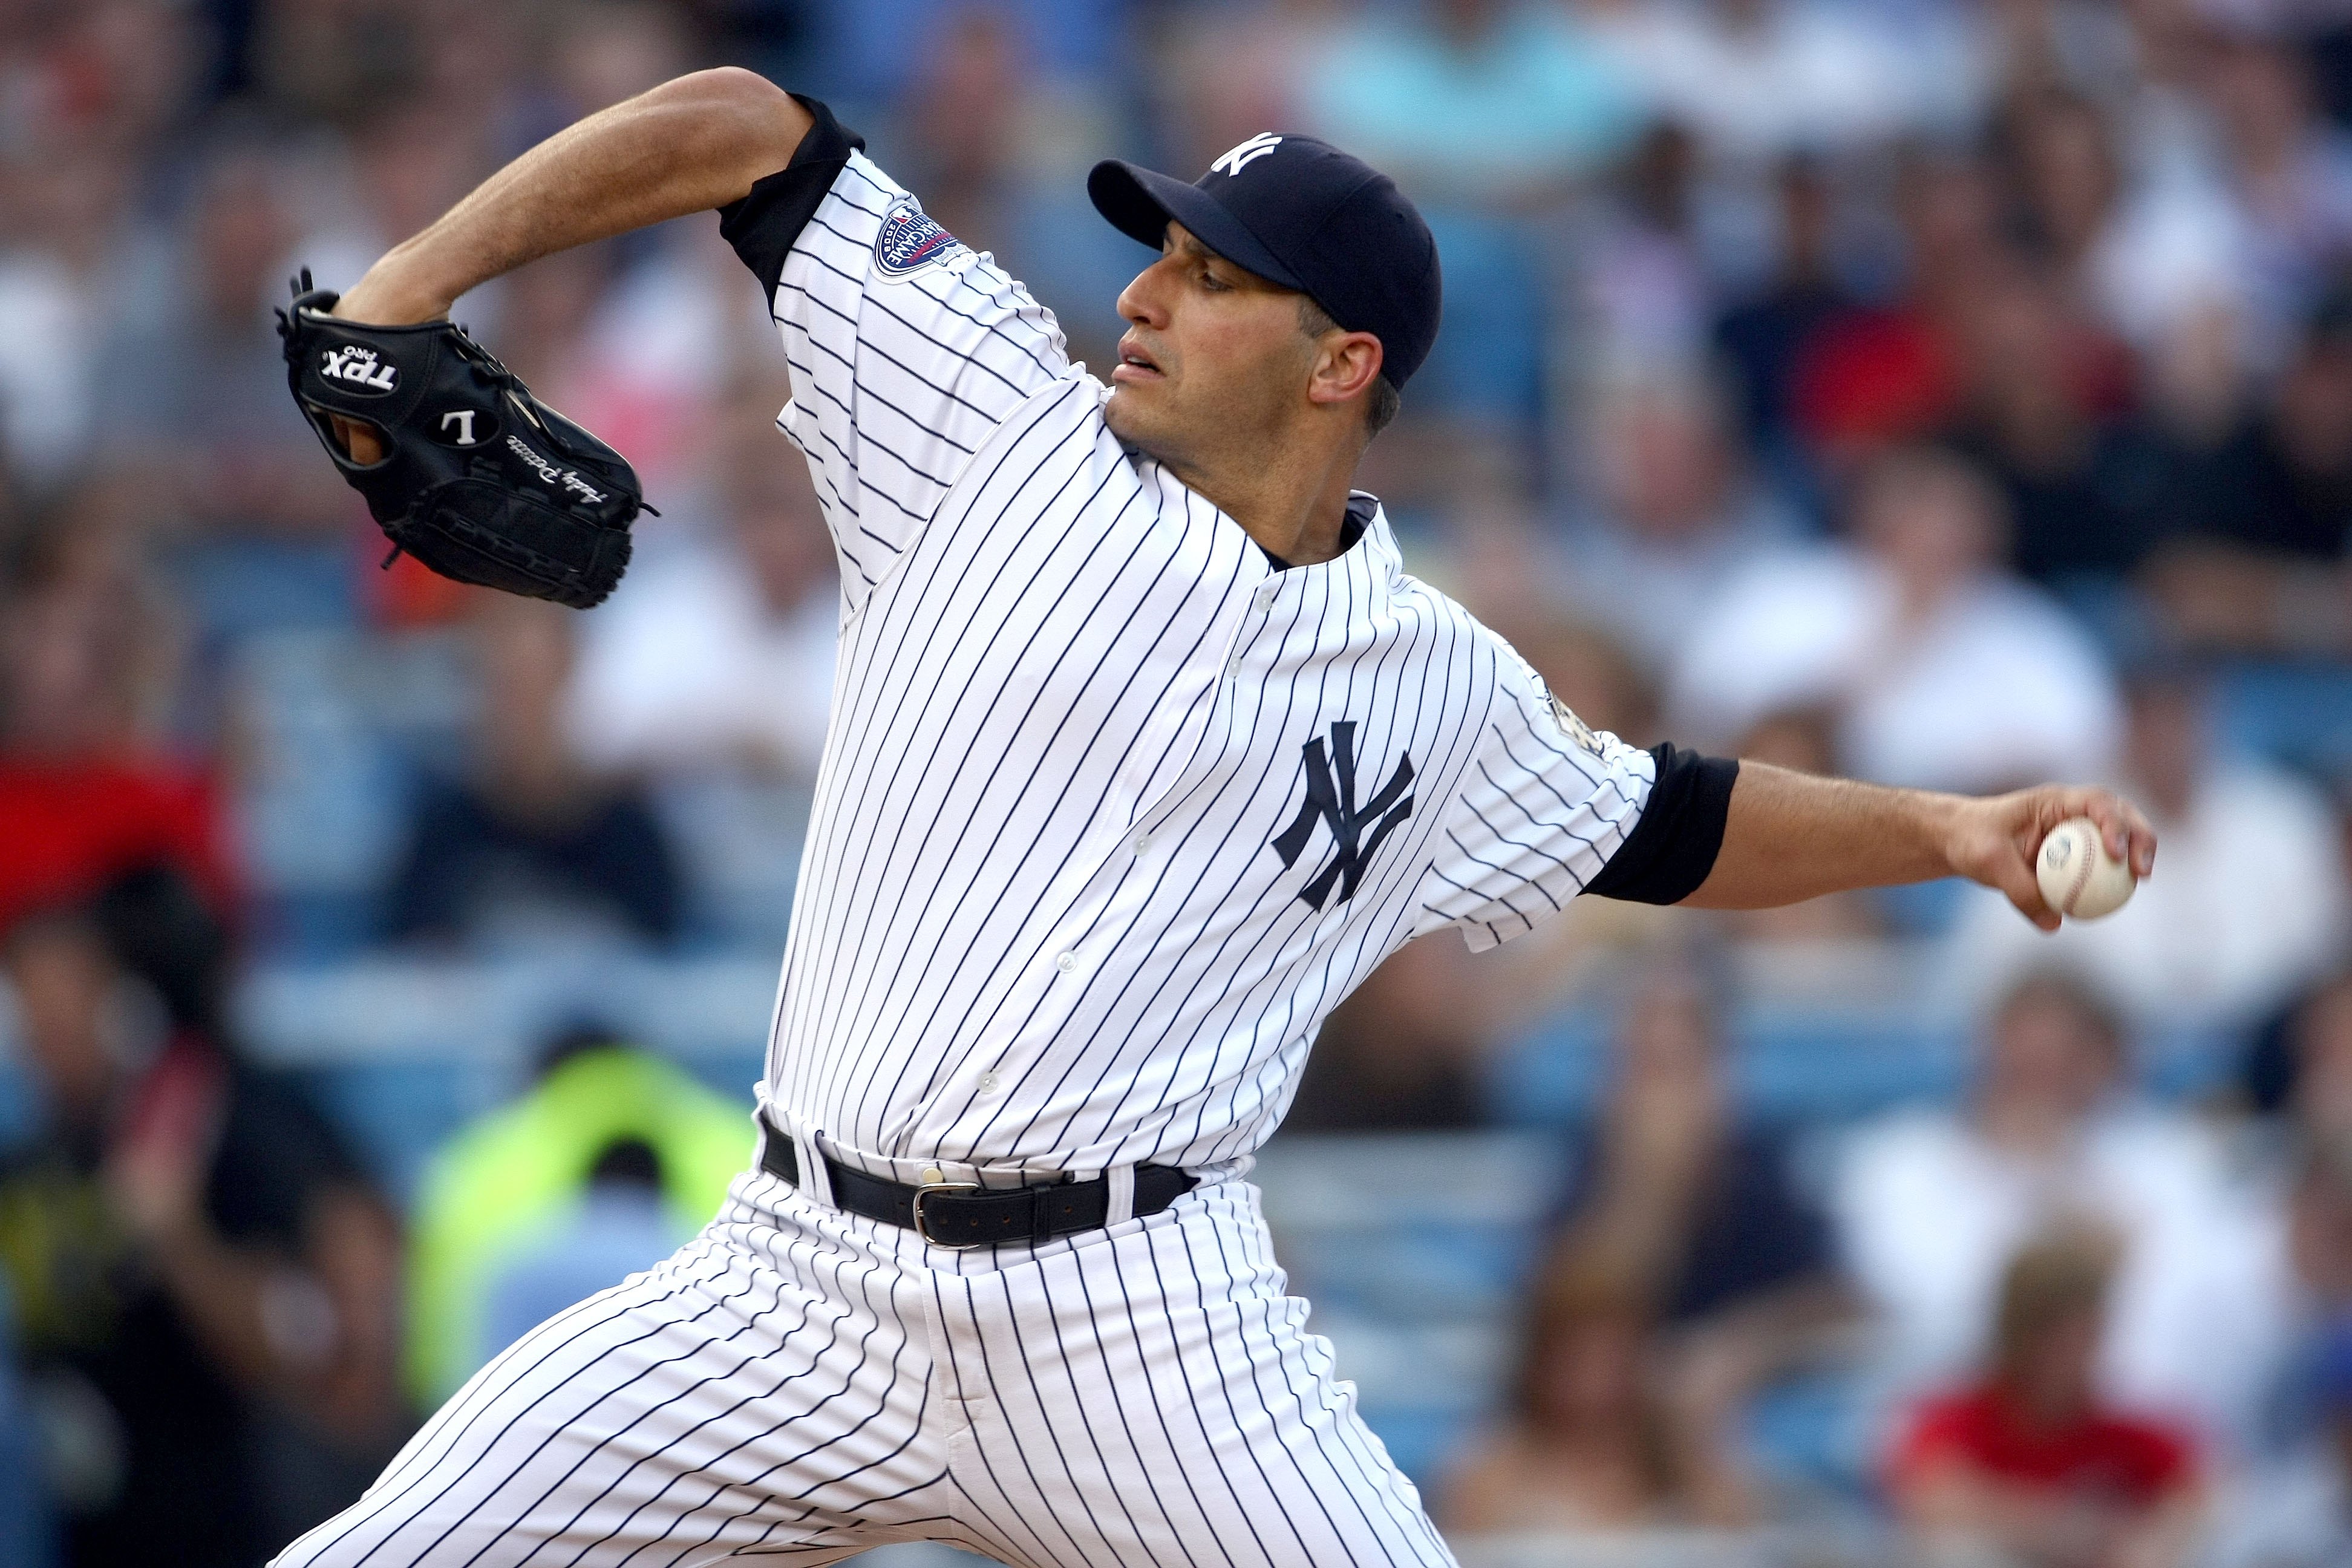 Andy Pettitte Slow Motion Pitching Mechanics - New York Yankees Pitcher  Drills Tips MLB 